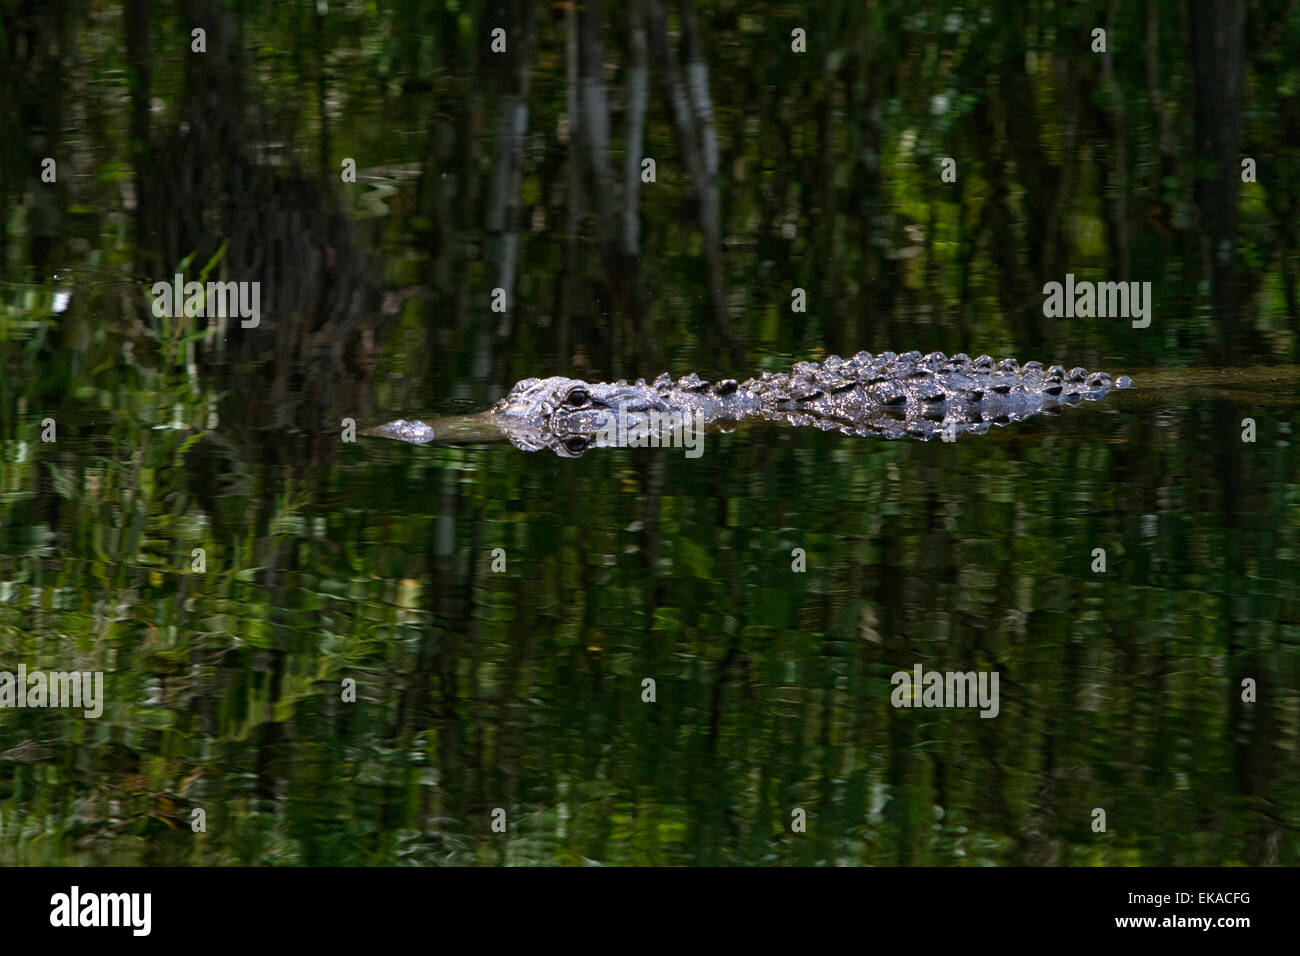 American alligator in the everglades of Florida, USA. Stock Photo